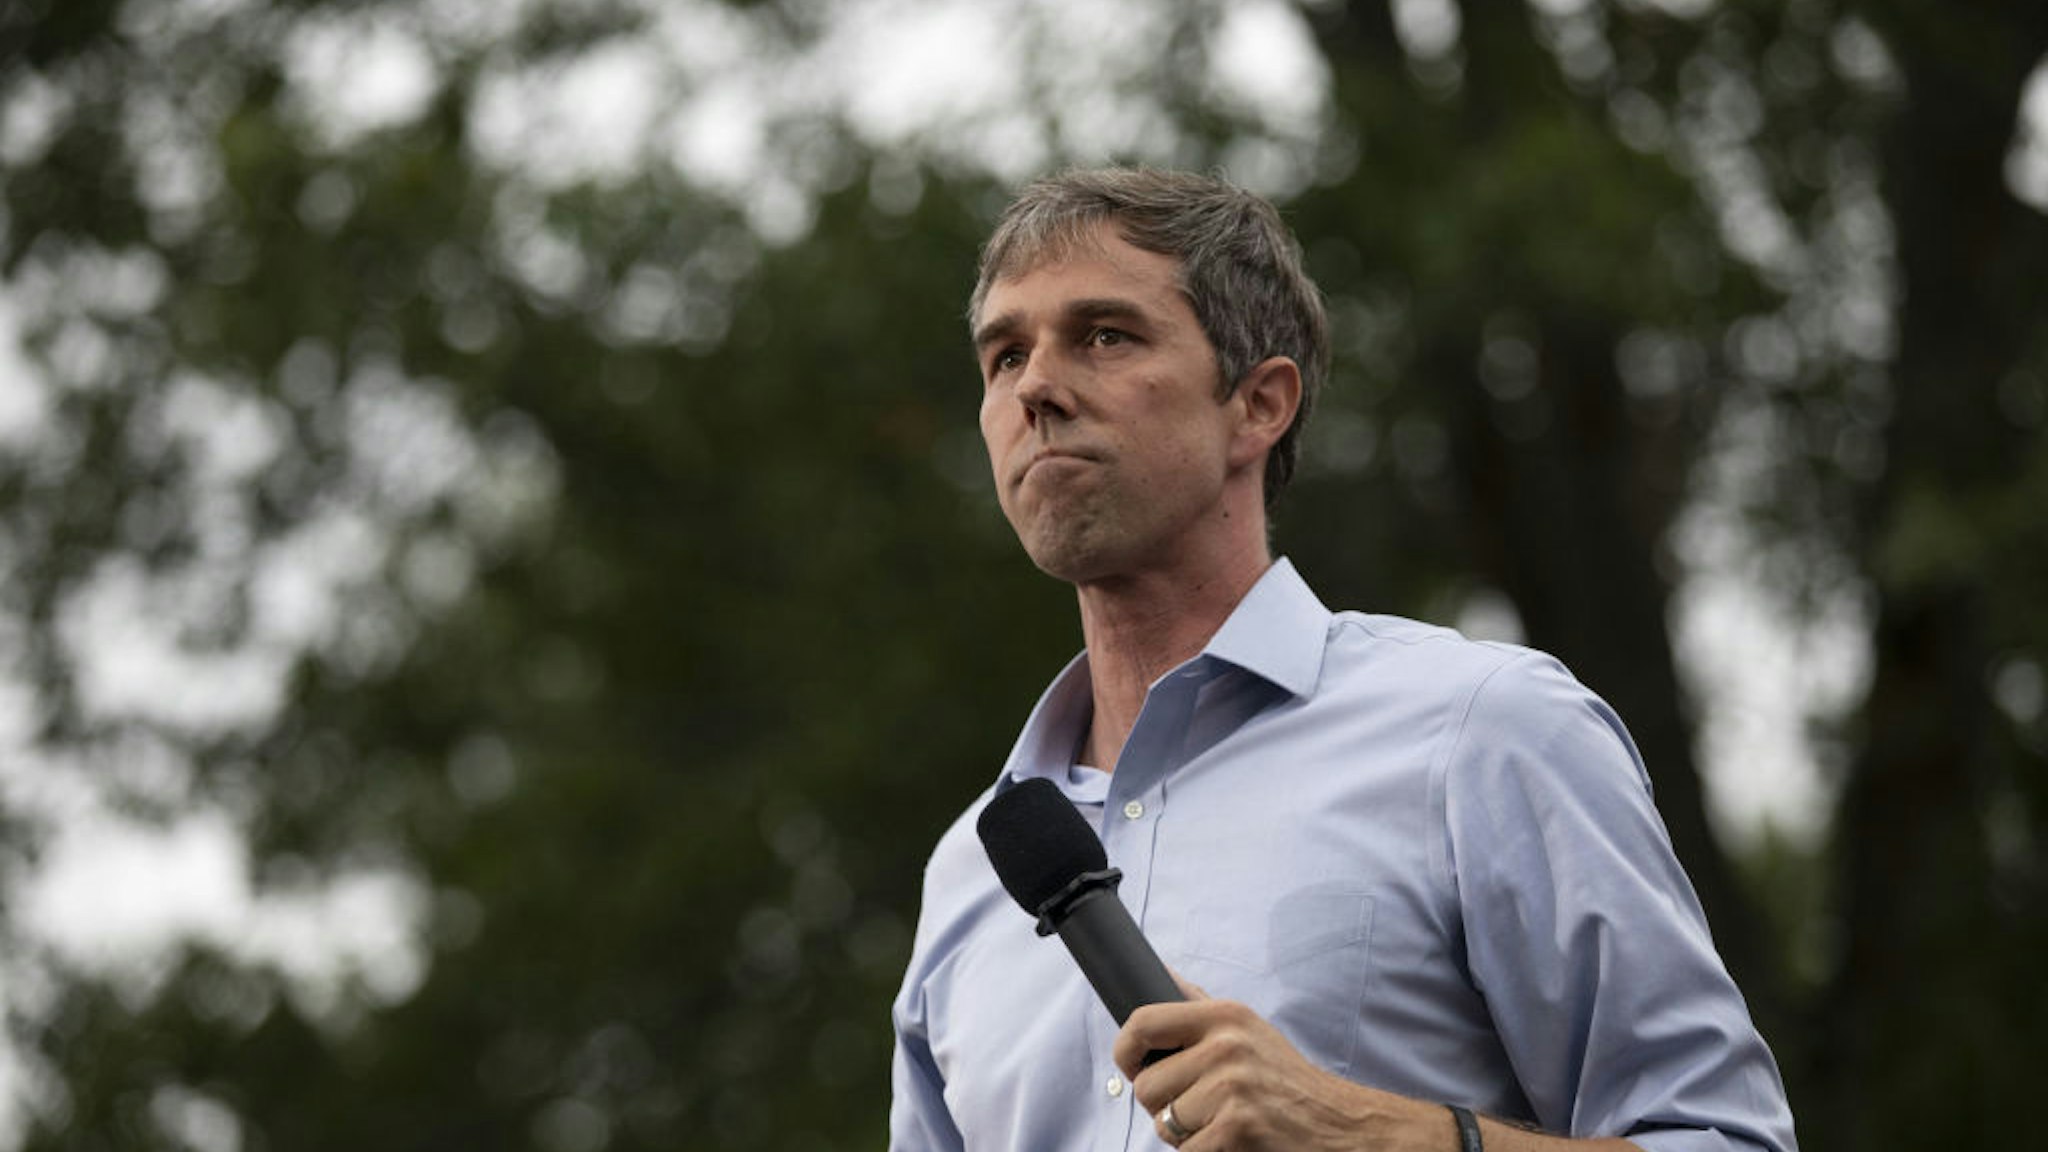 Beto O'Rourke pauses while speaking at the Polk County Steak Fry in Des Moines, Iowa,